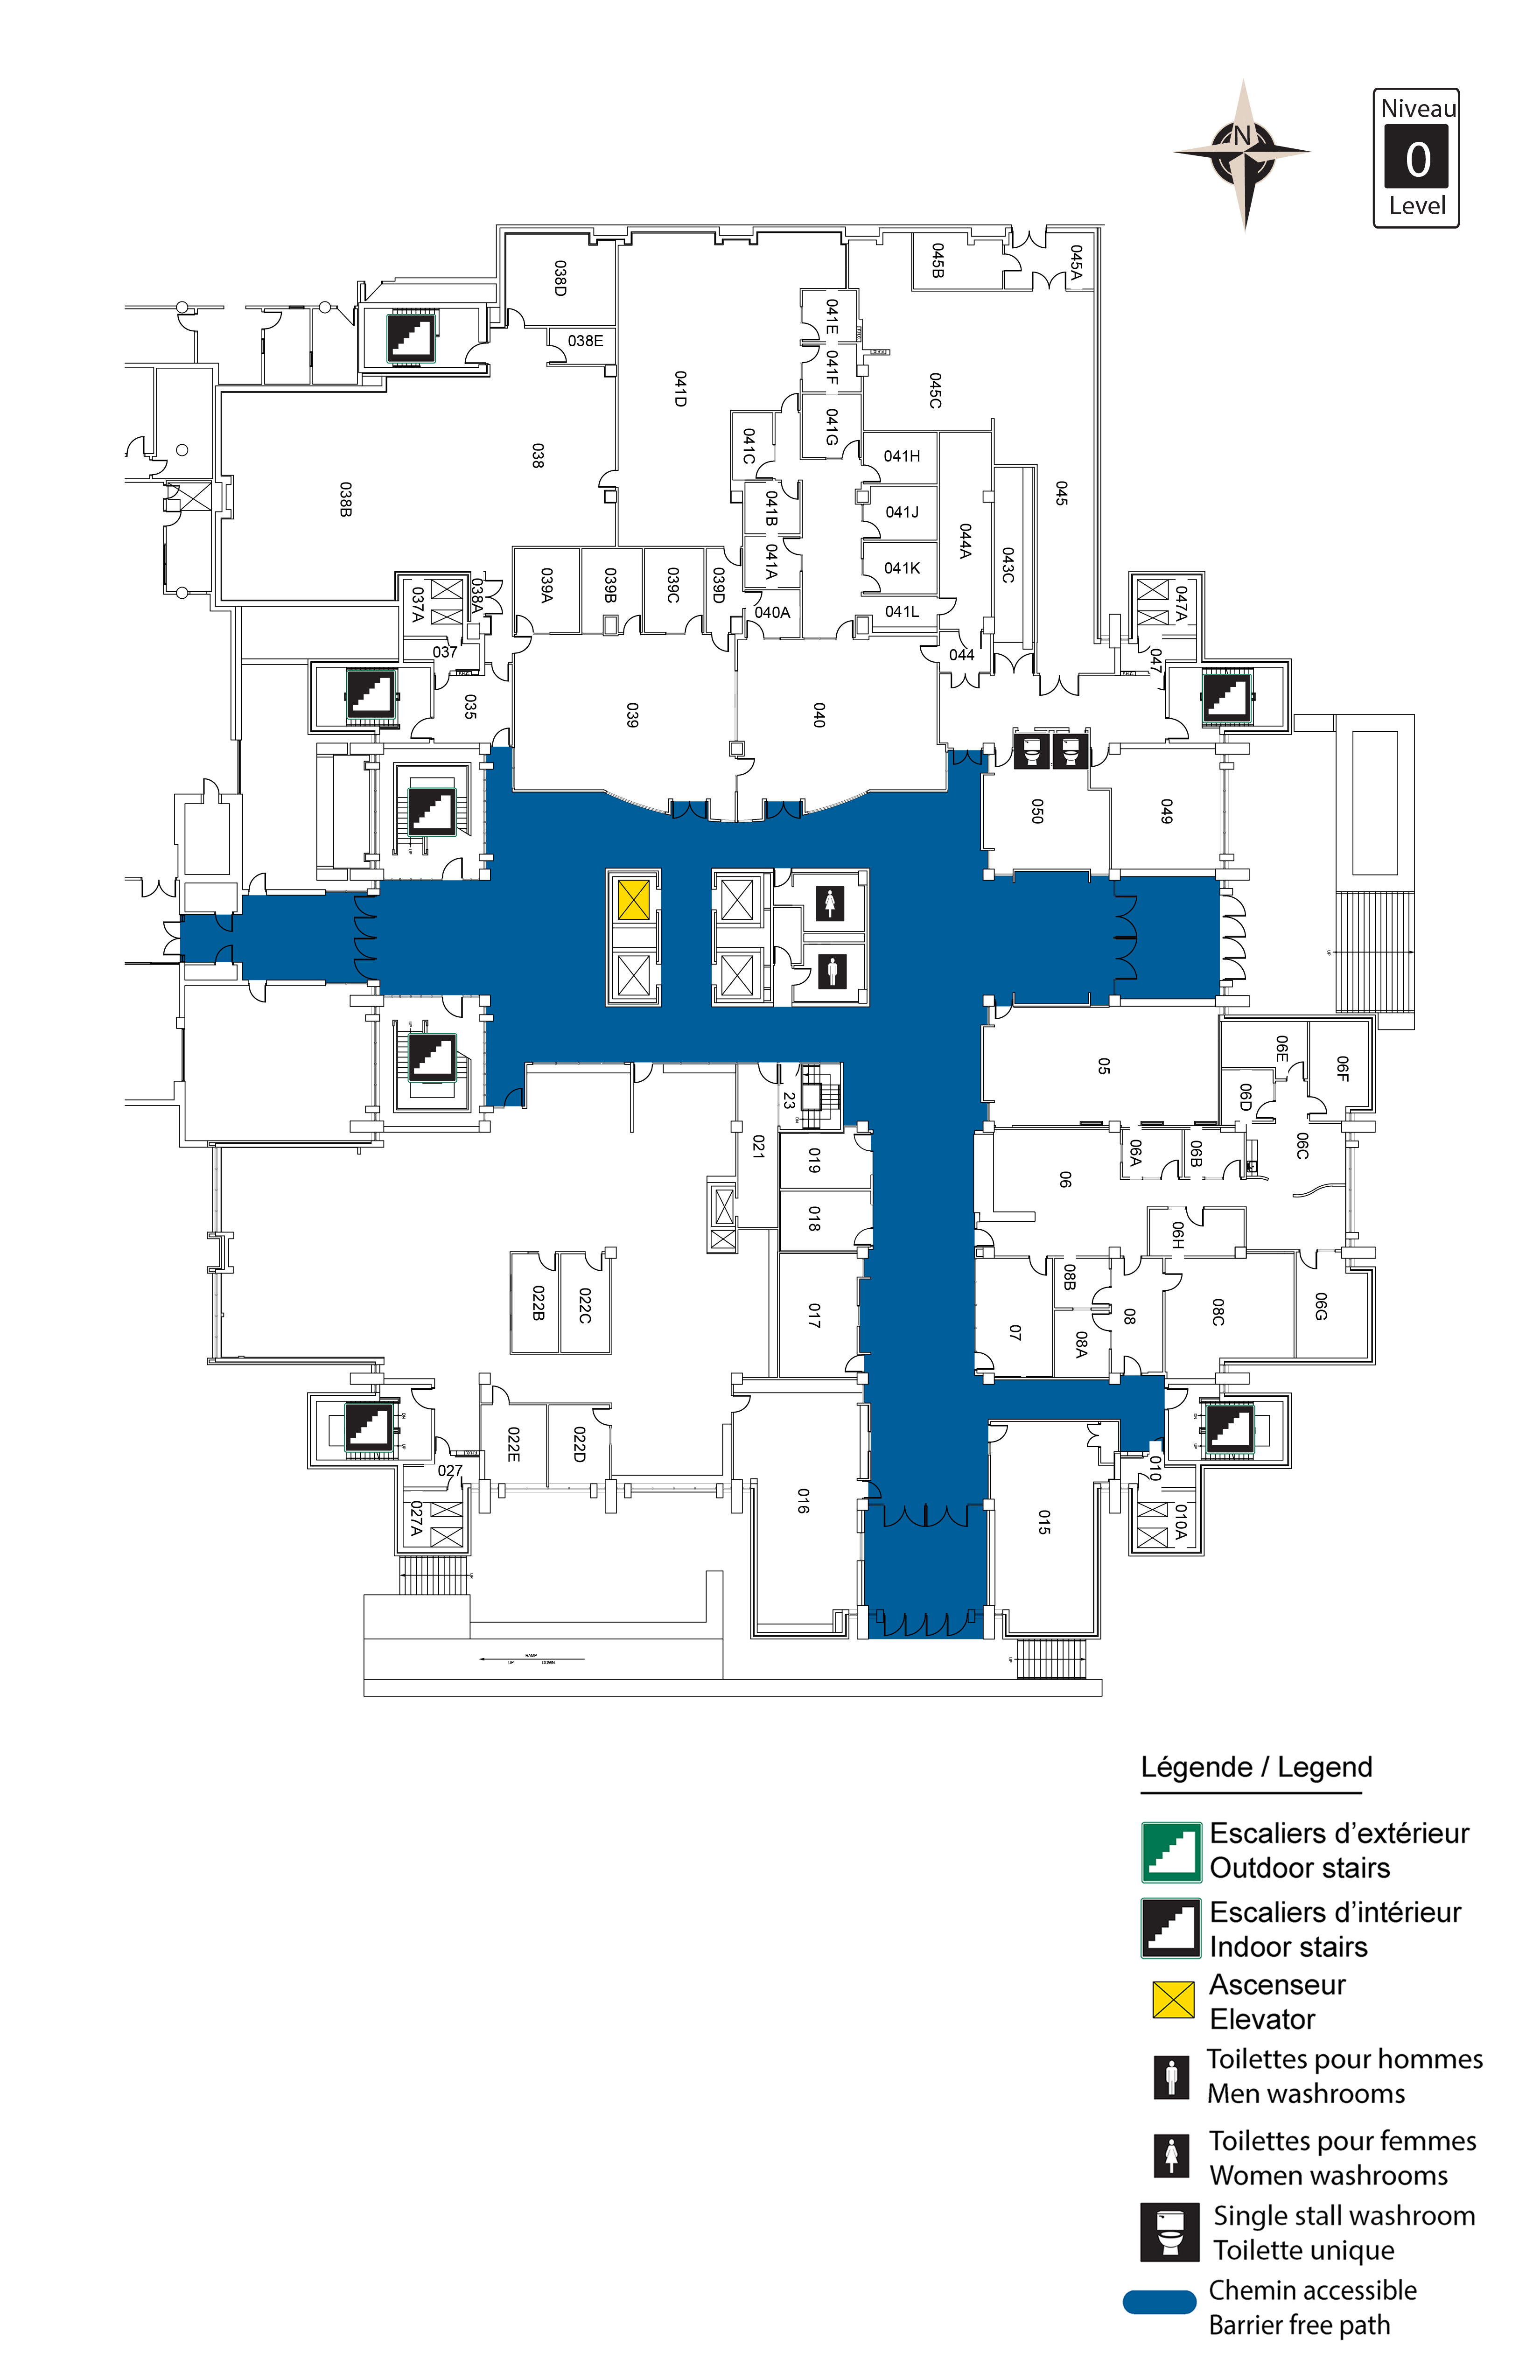 Accessible map of Morisset level 0